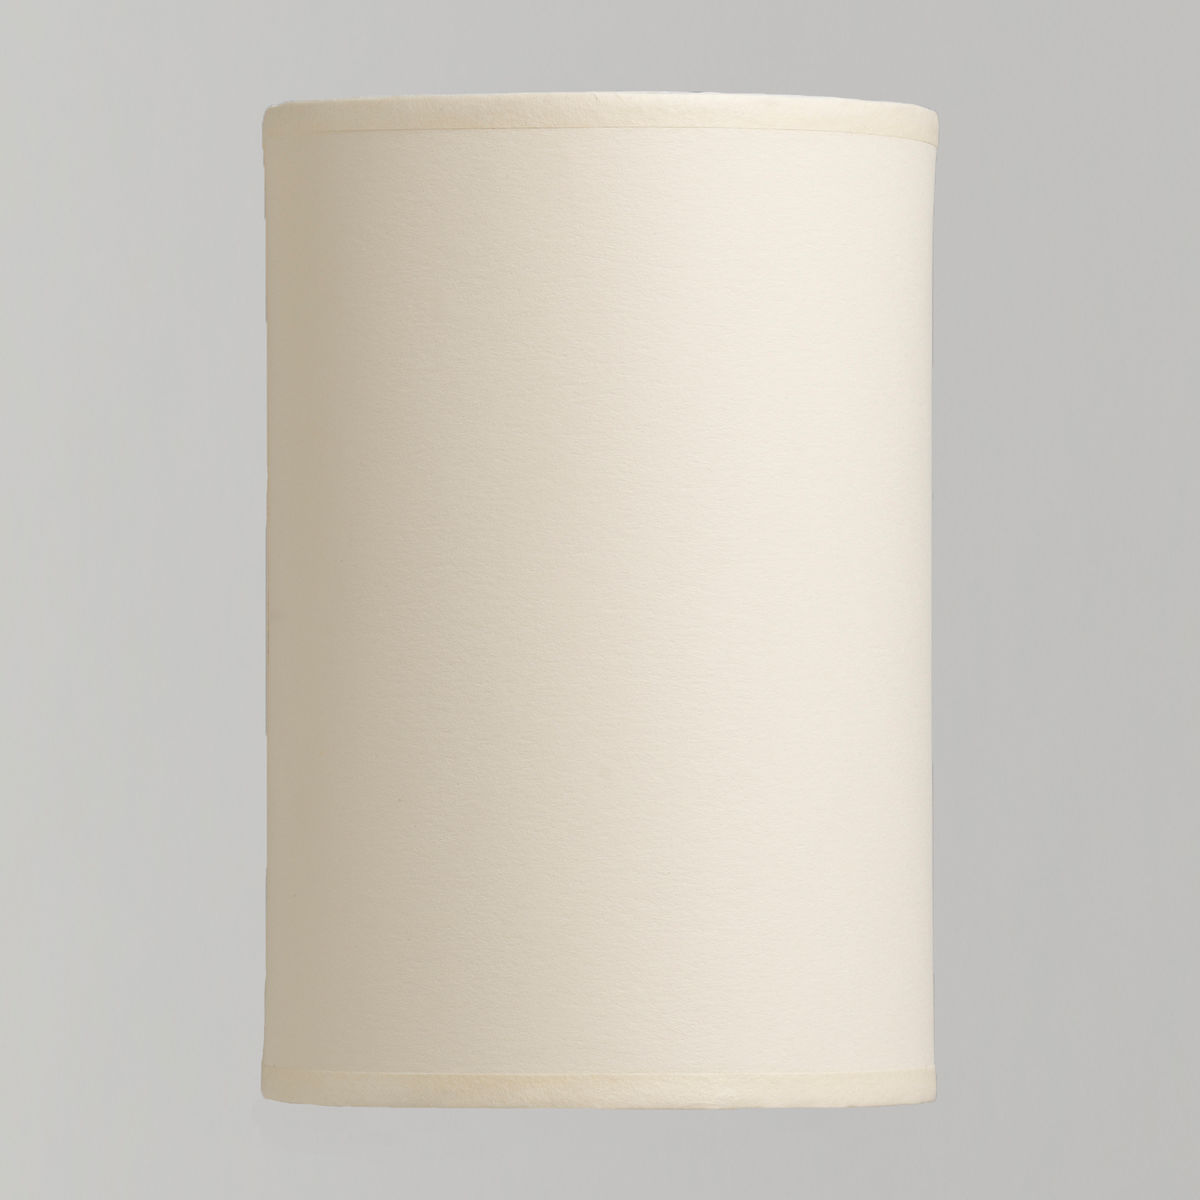 Half cylindrical long lampshade in cream card on detail